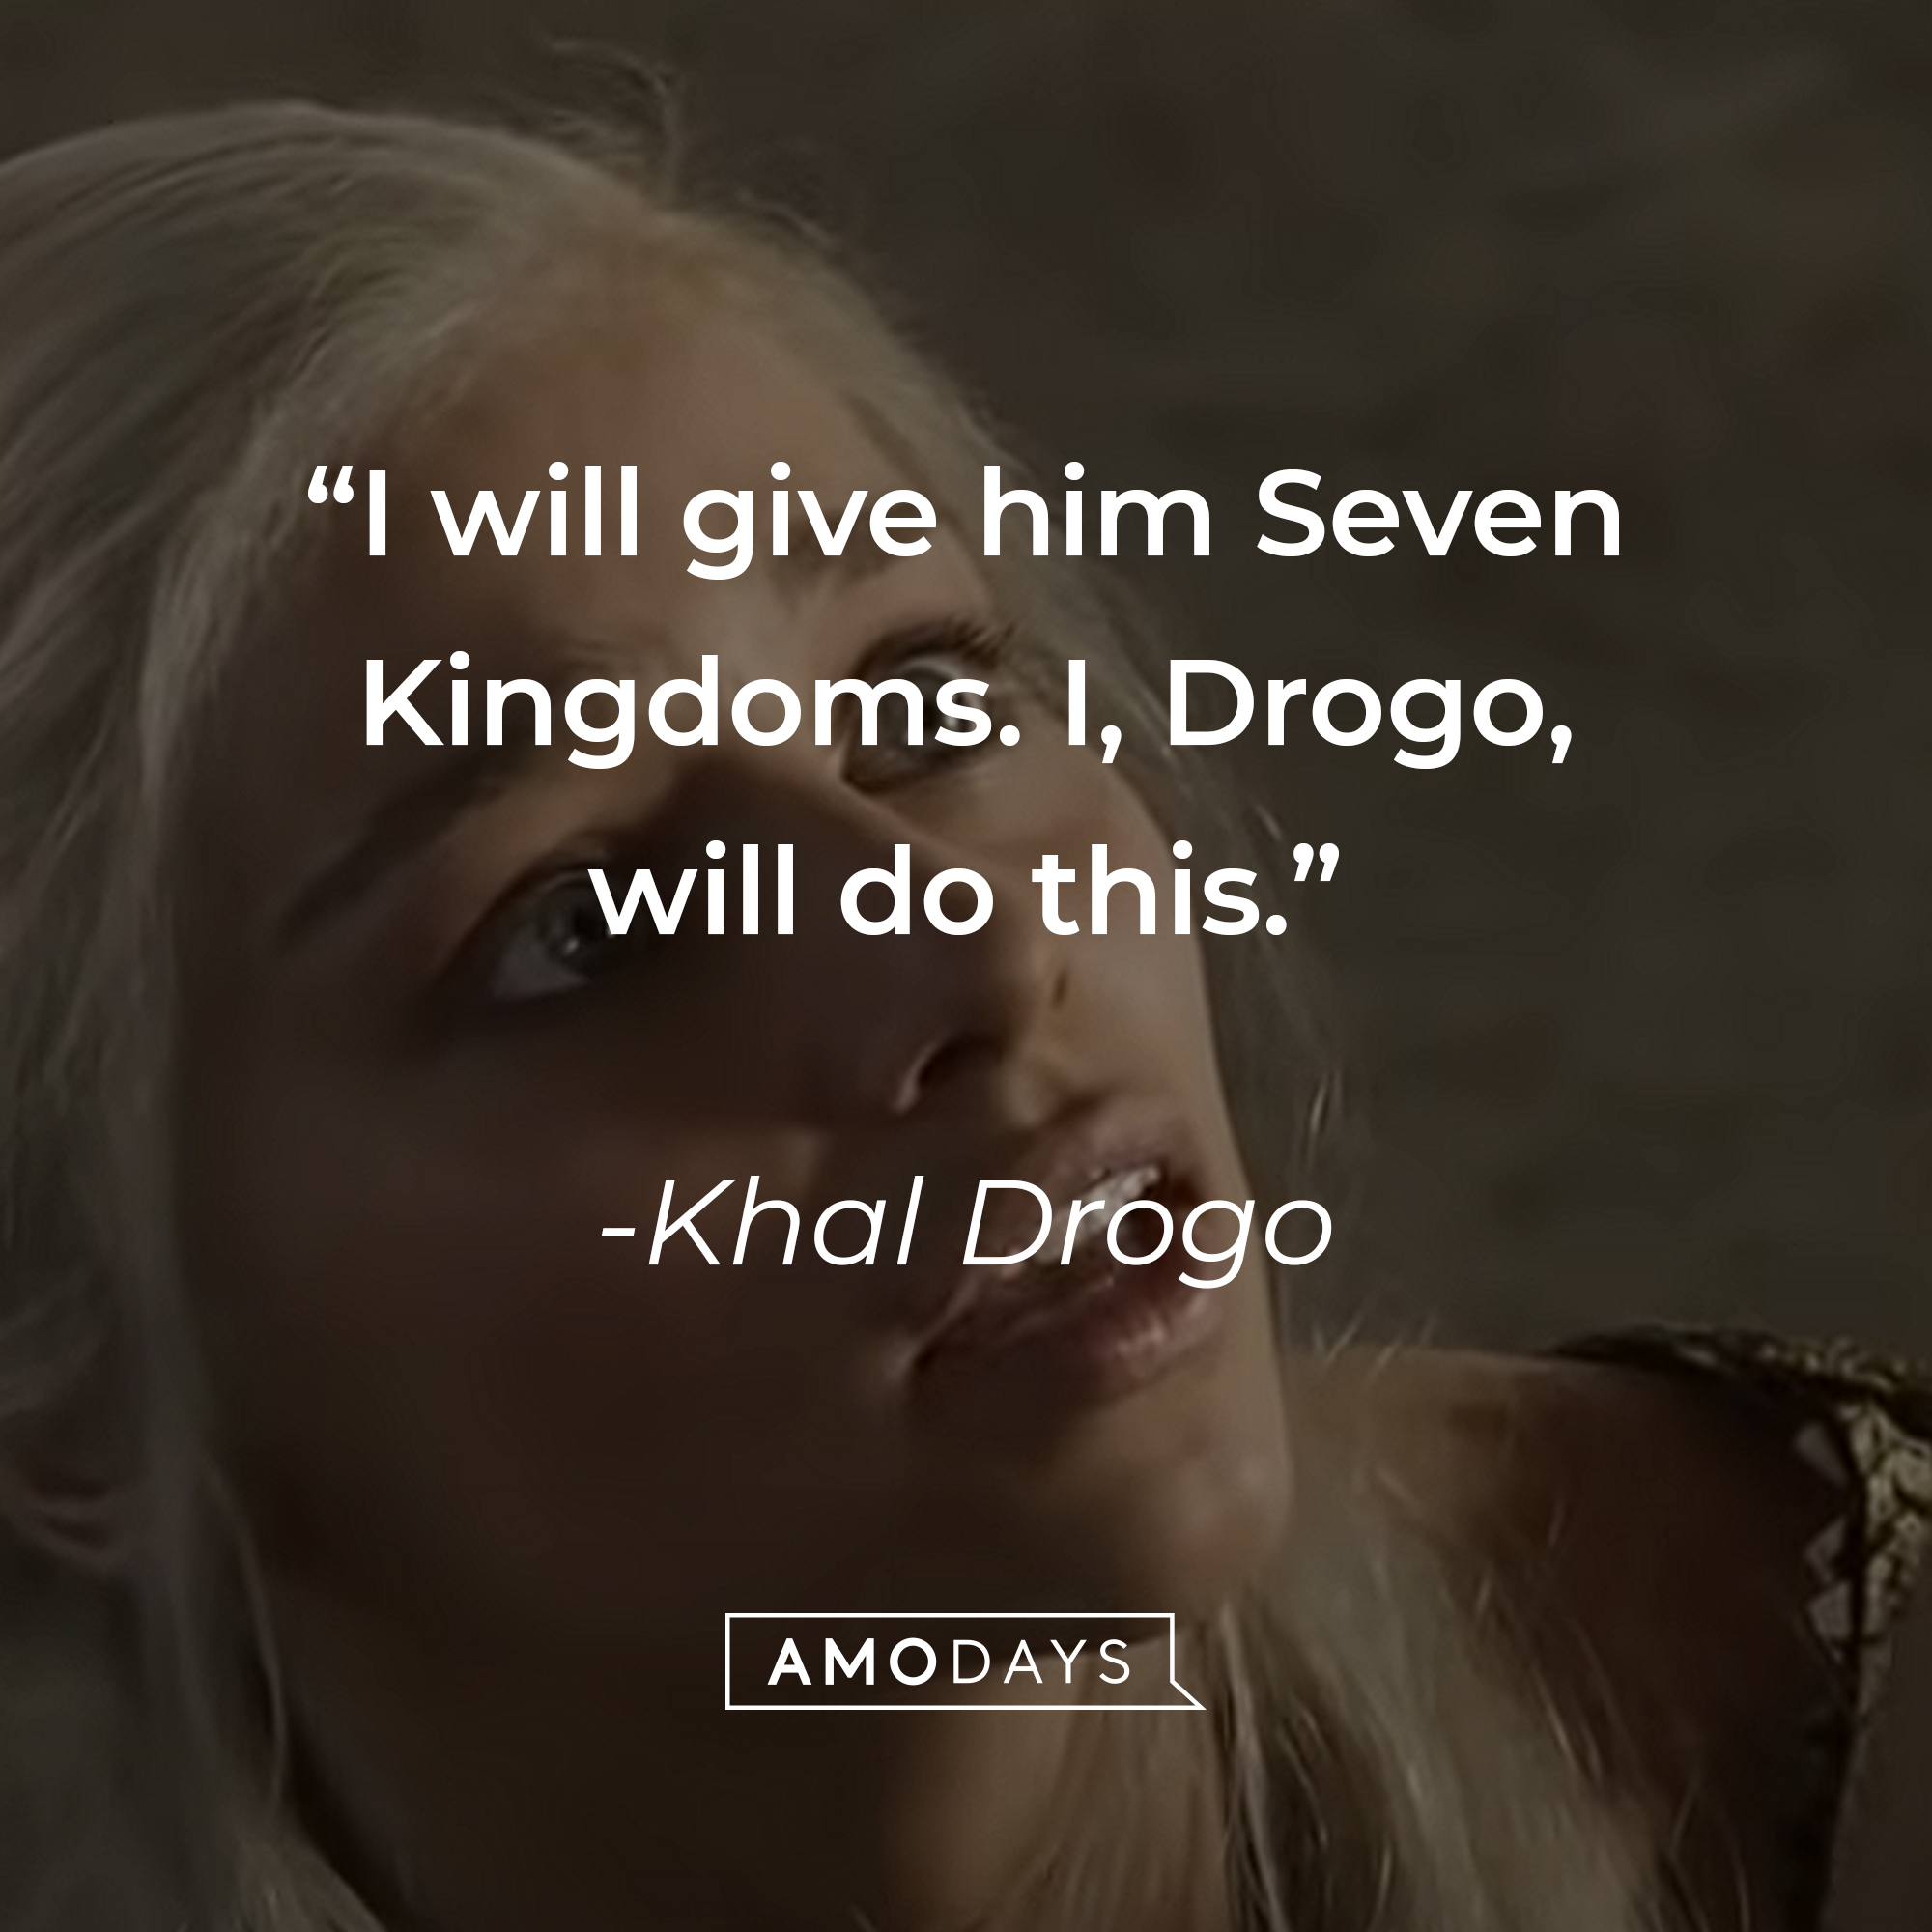 Khal Drogo's quote: "I will give him Seven Kingdoms. I, Drogo, will do this." | Source: youtube.com/gameofthrones